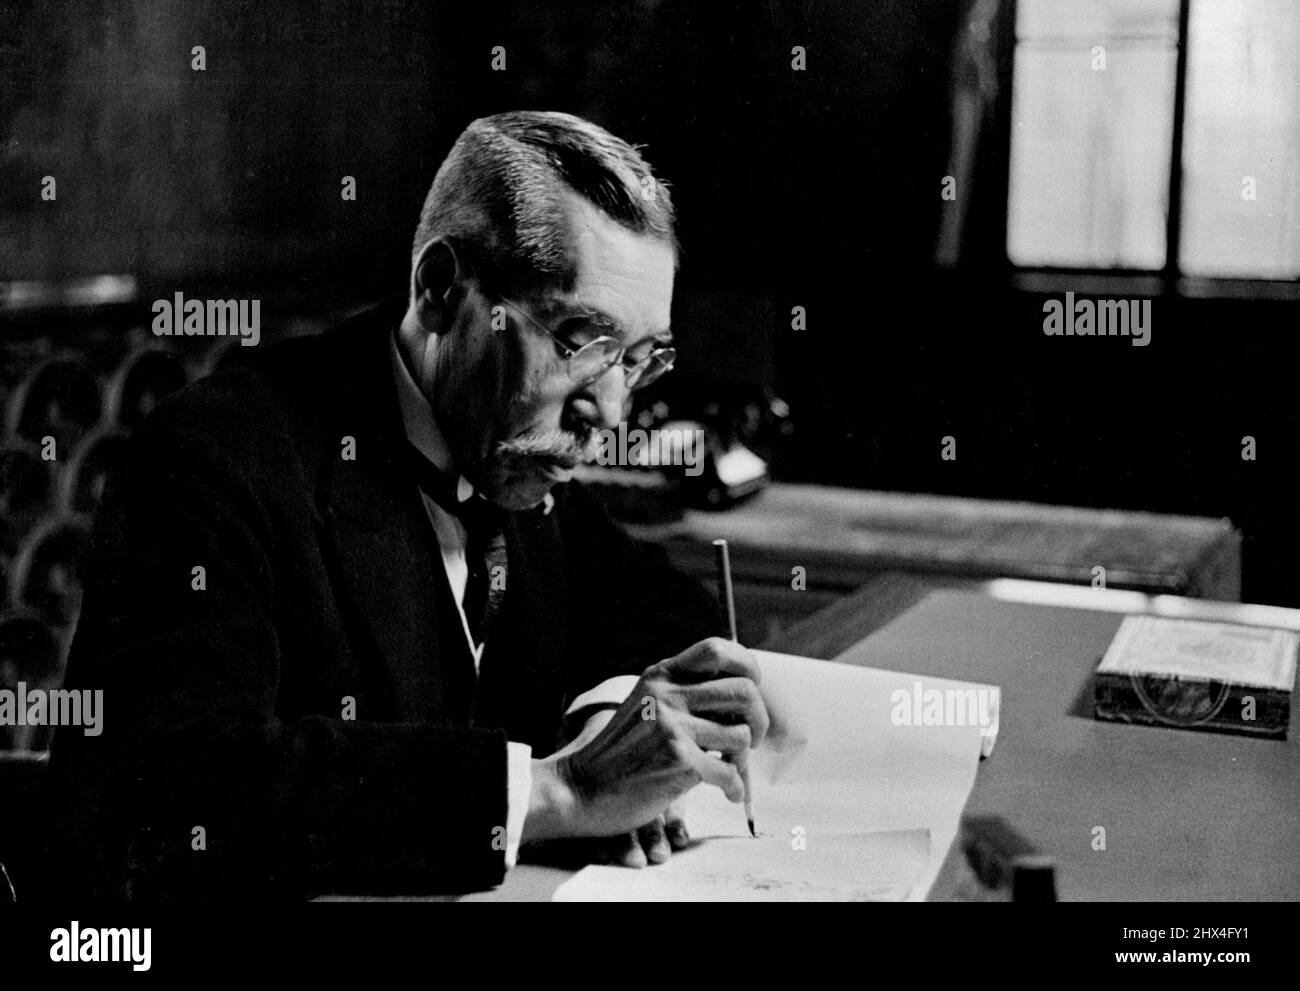 Premier Hiranuma -- The Premier of Japan at his official desk, composing a Japanese letter with a brush. His appointment early in January climaxes a notable official career spanning half a century. Born in 1866, in Okayama Prefecture; he is a graduate of the Law College of Tokyo Imperial University. Starting his career in the Minis-try of Justice as public procurator (prosecutor) in provincial courts, he rose to the directorship of the Board of Criminal Affairs, became Vice-Minister of Justice, was promoted to Procurator General, appointed Chief Justice; and finally Minister of Justice in the Stock Photo